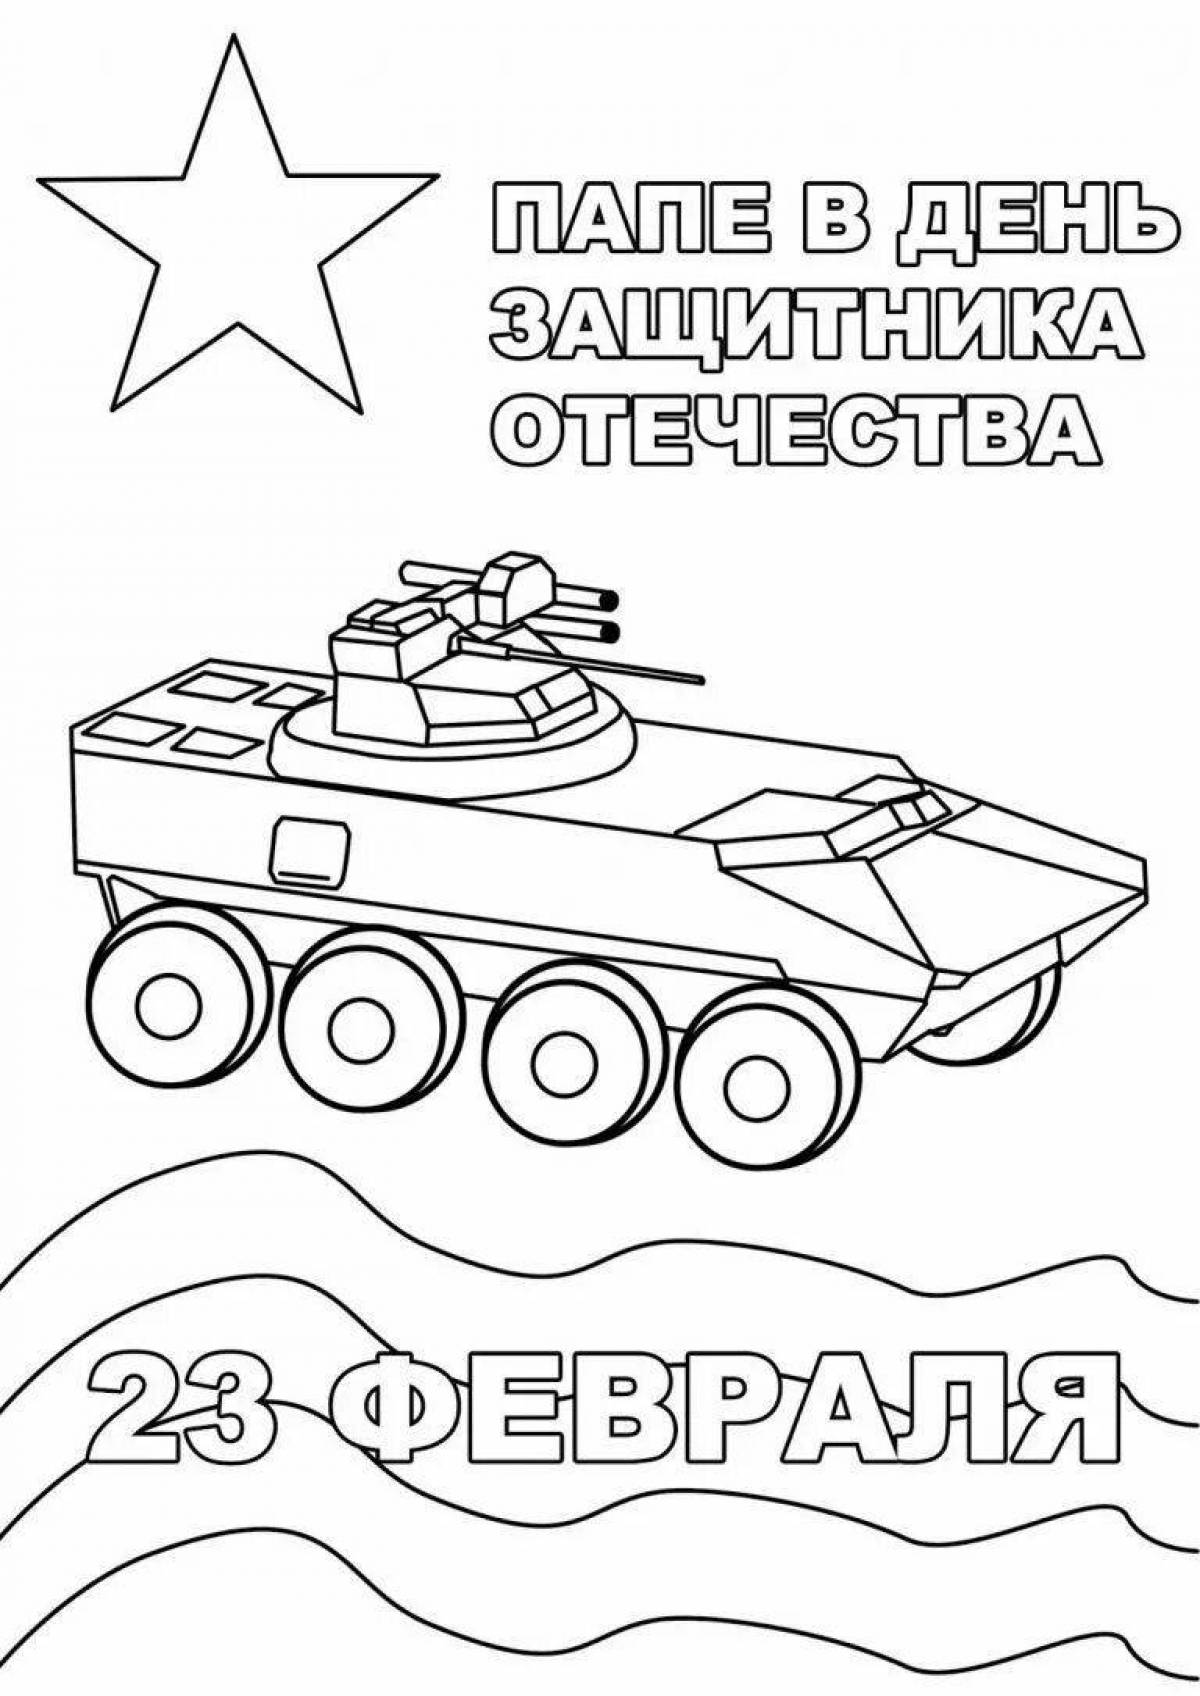 Playful defenders of the fatherland for children